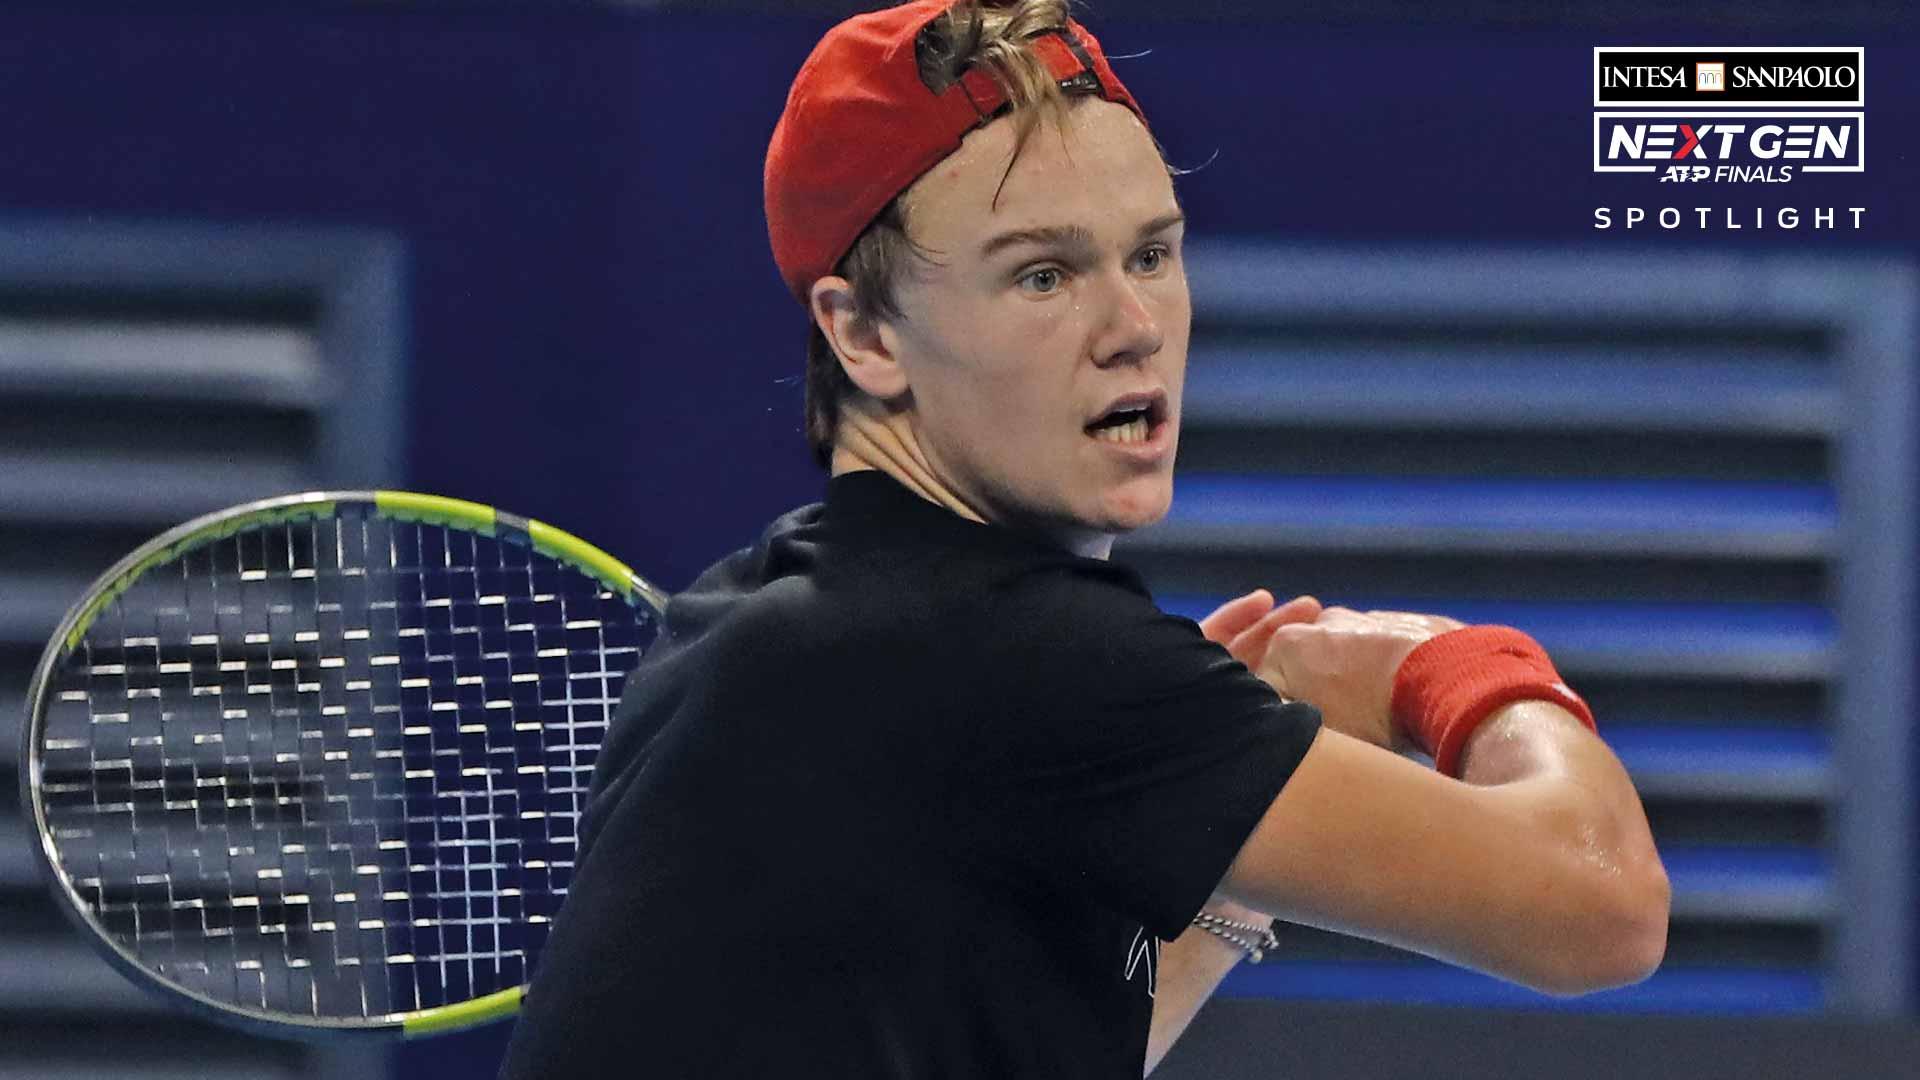 Rune and#39;You Have To Be Brave With No-Ad Scoringand#39; News Article Next Gen ATP Finals Tennis